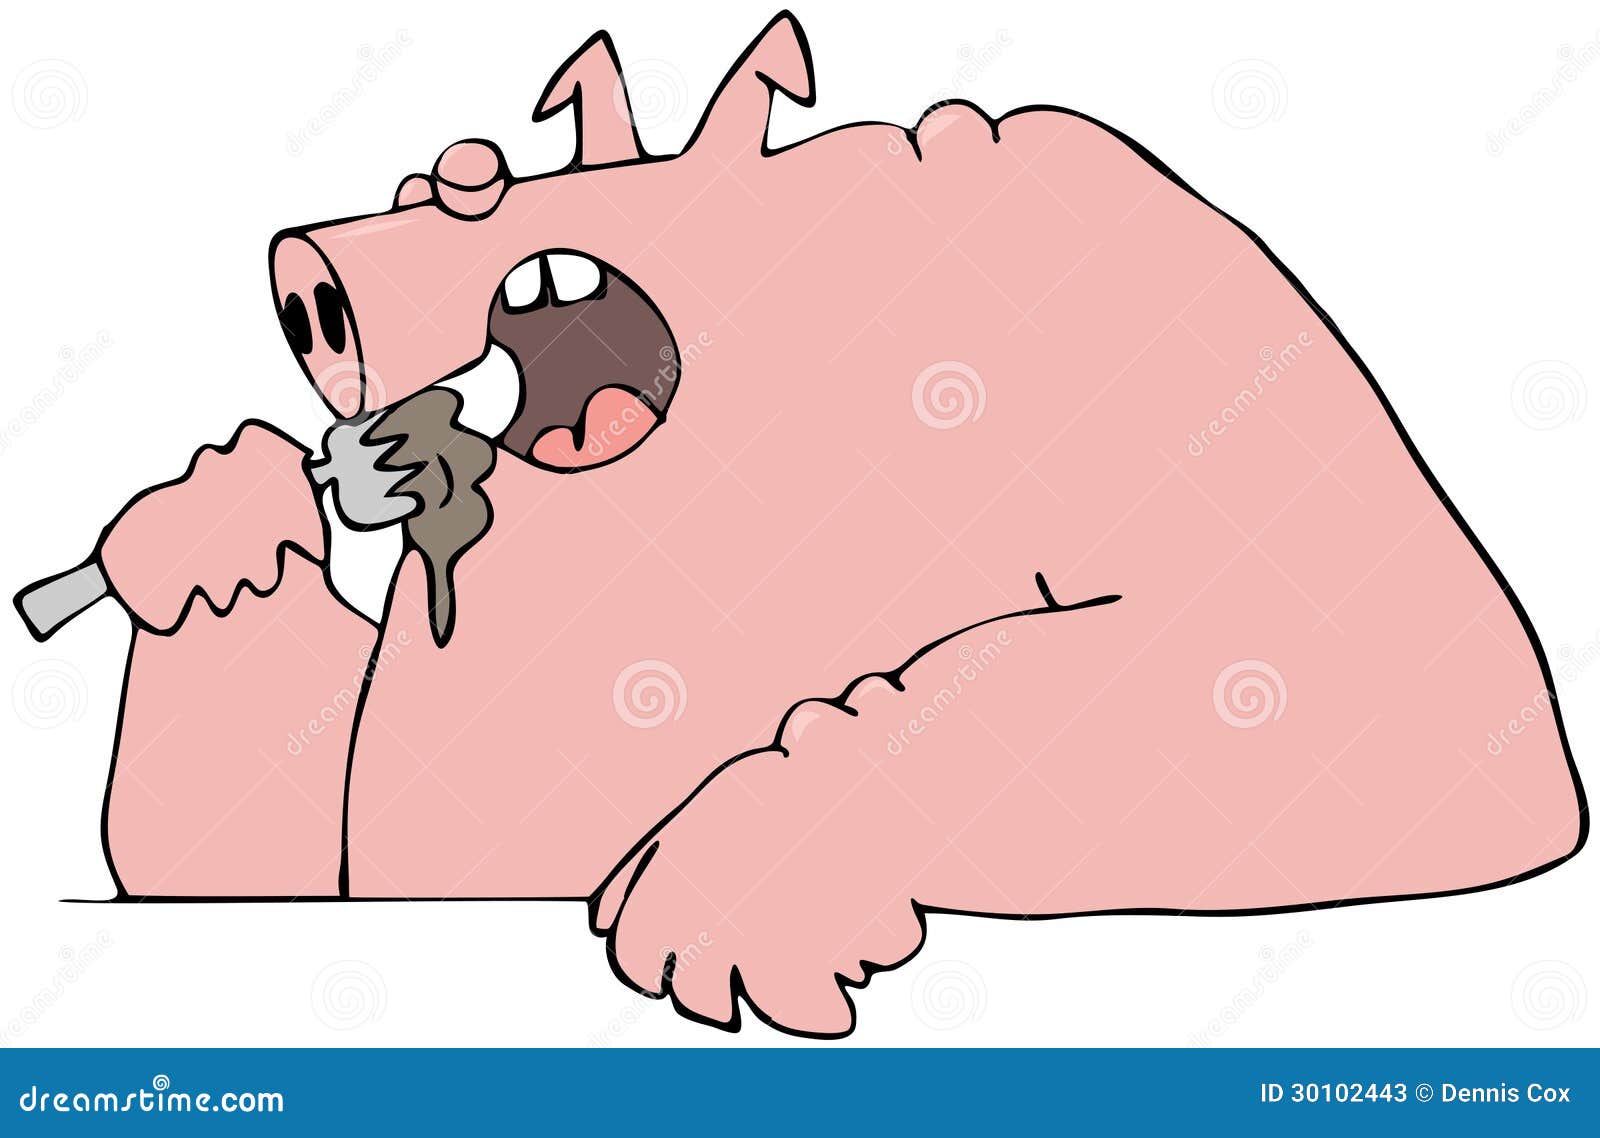 pig eating clipart - photo #17